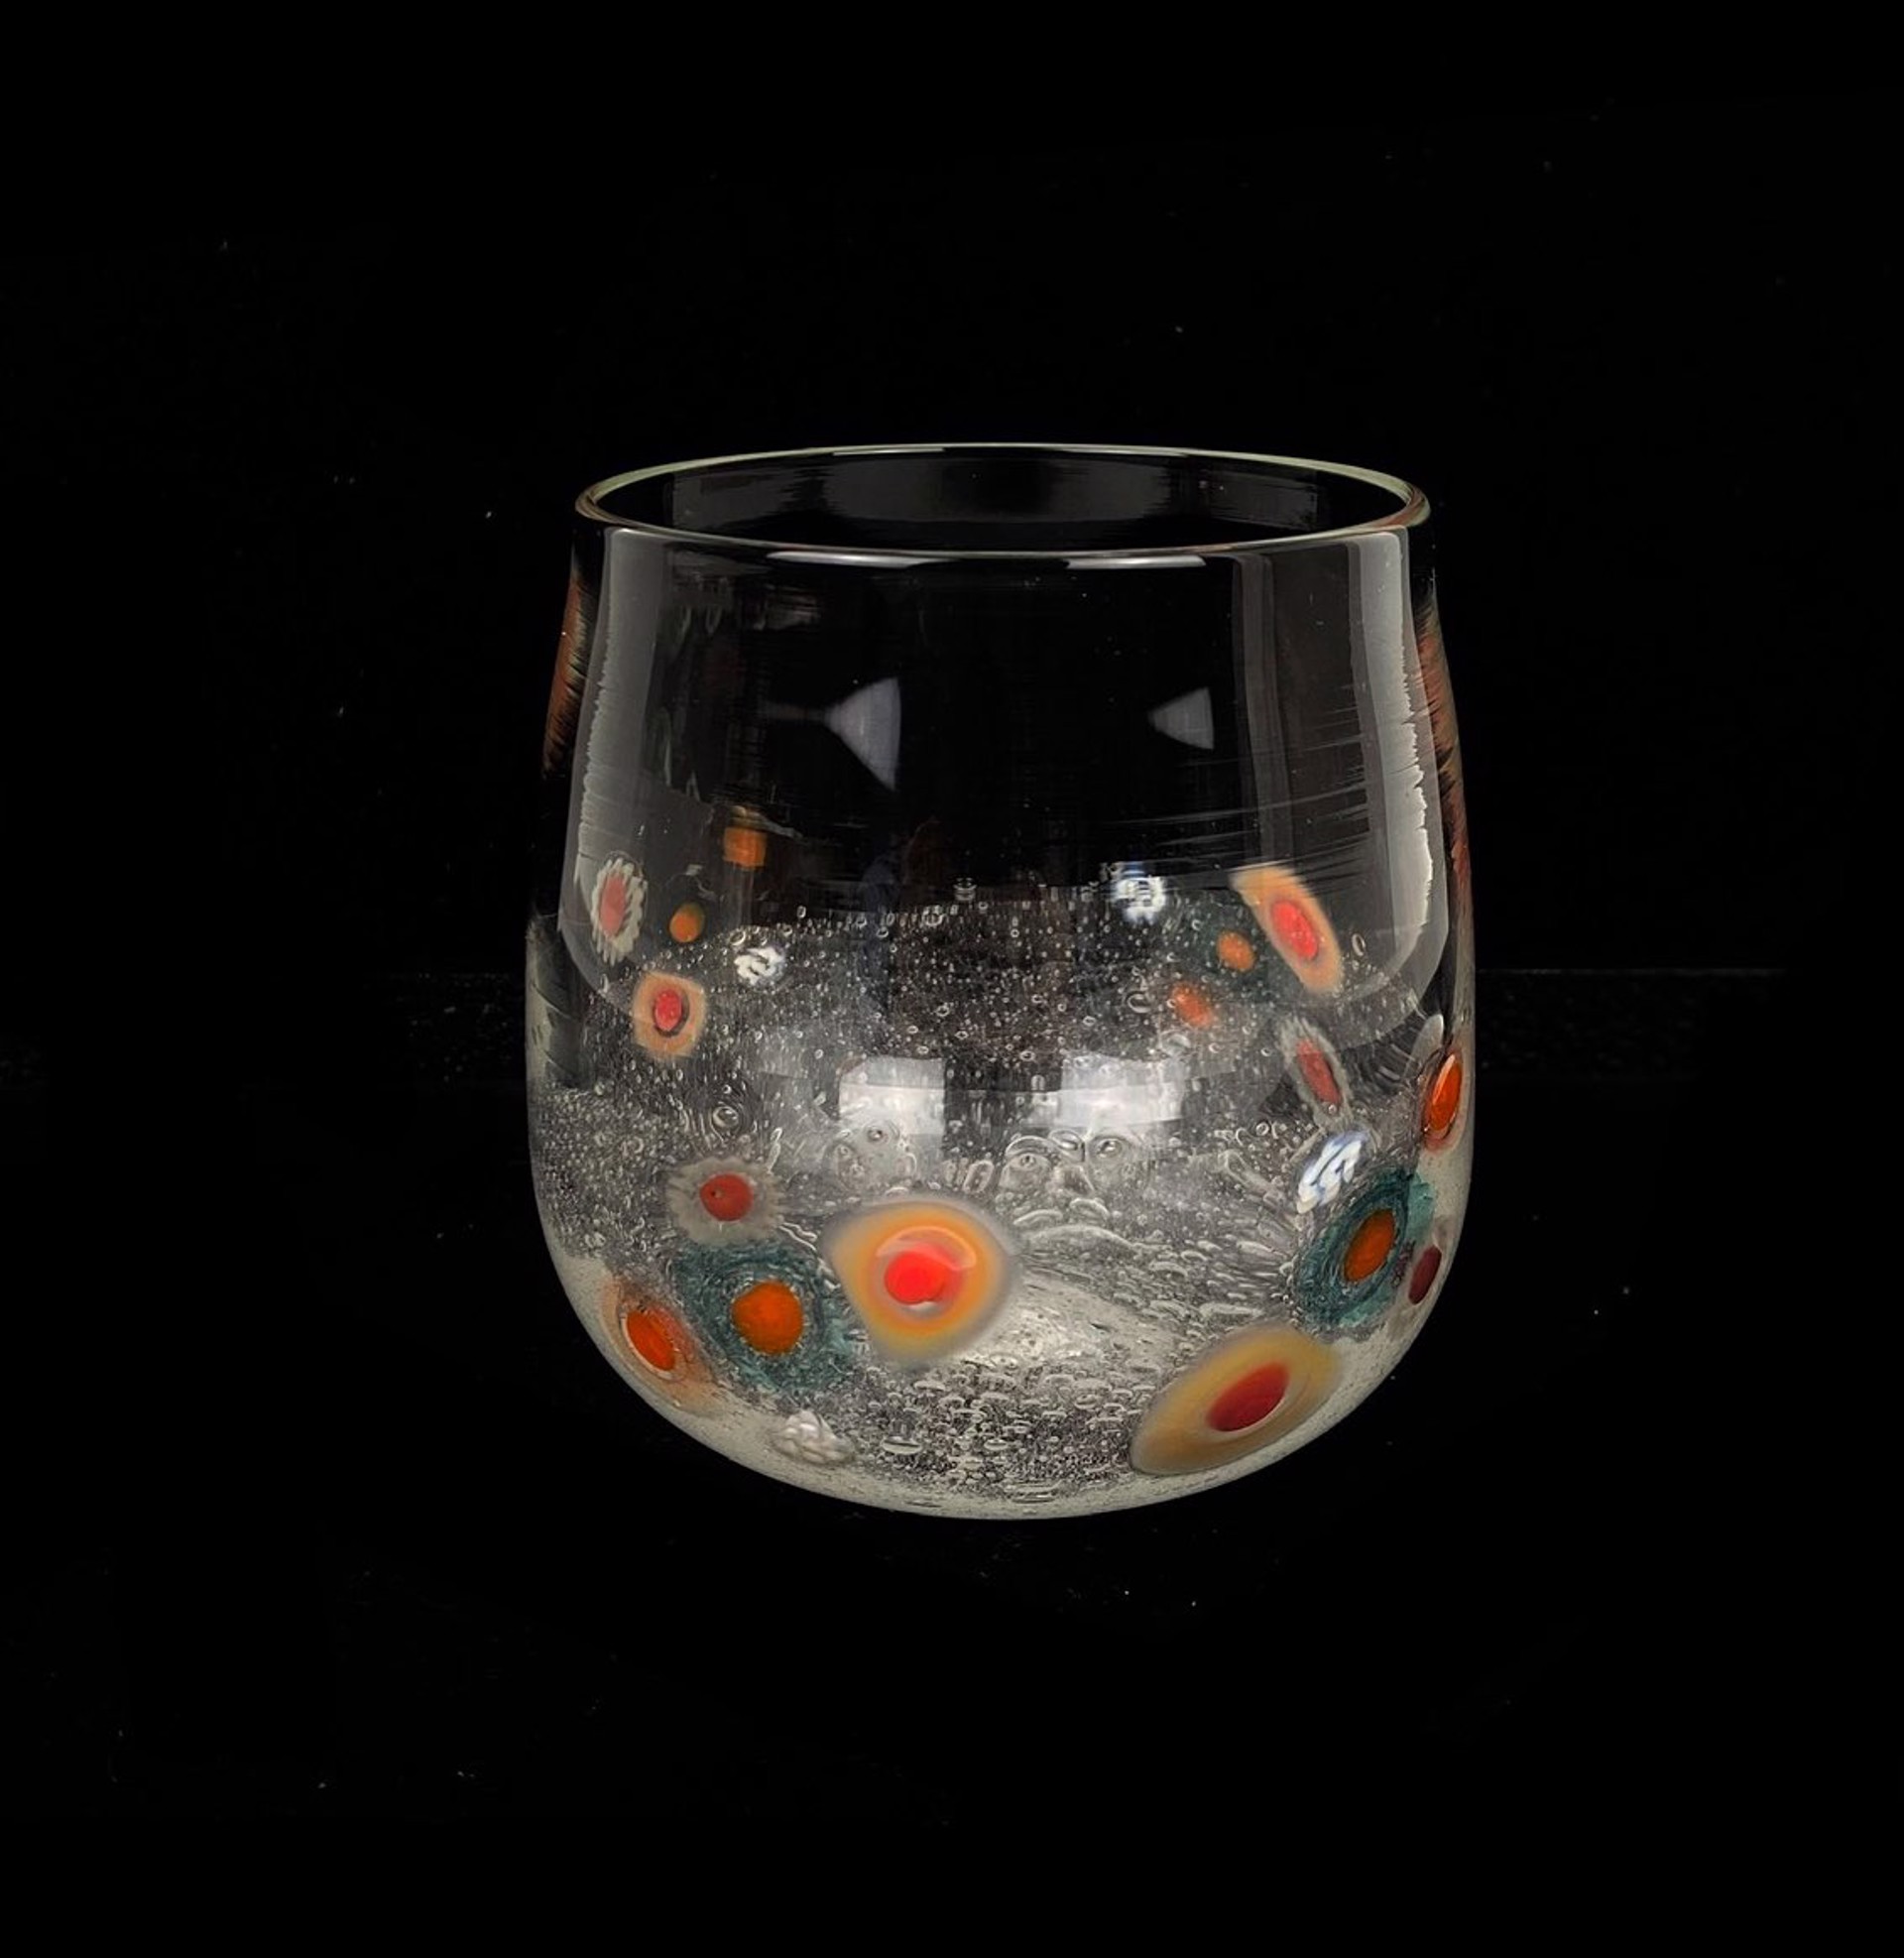 Millefiore Wine Glass by Chad Balster